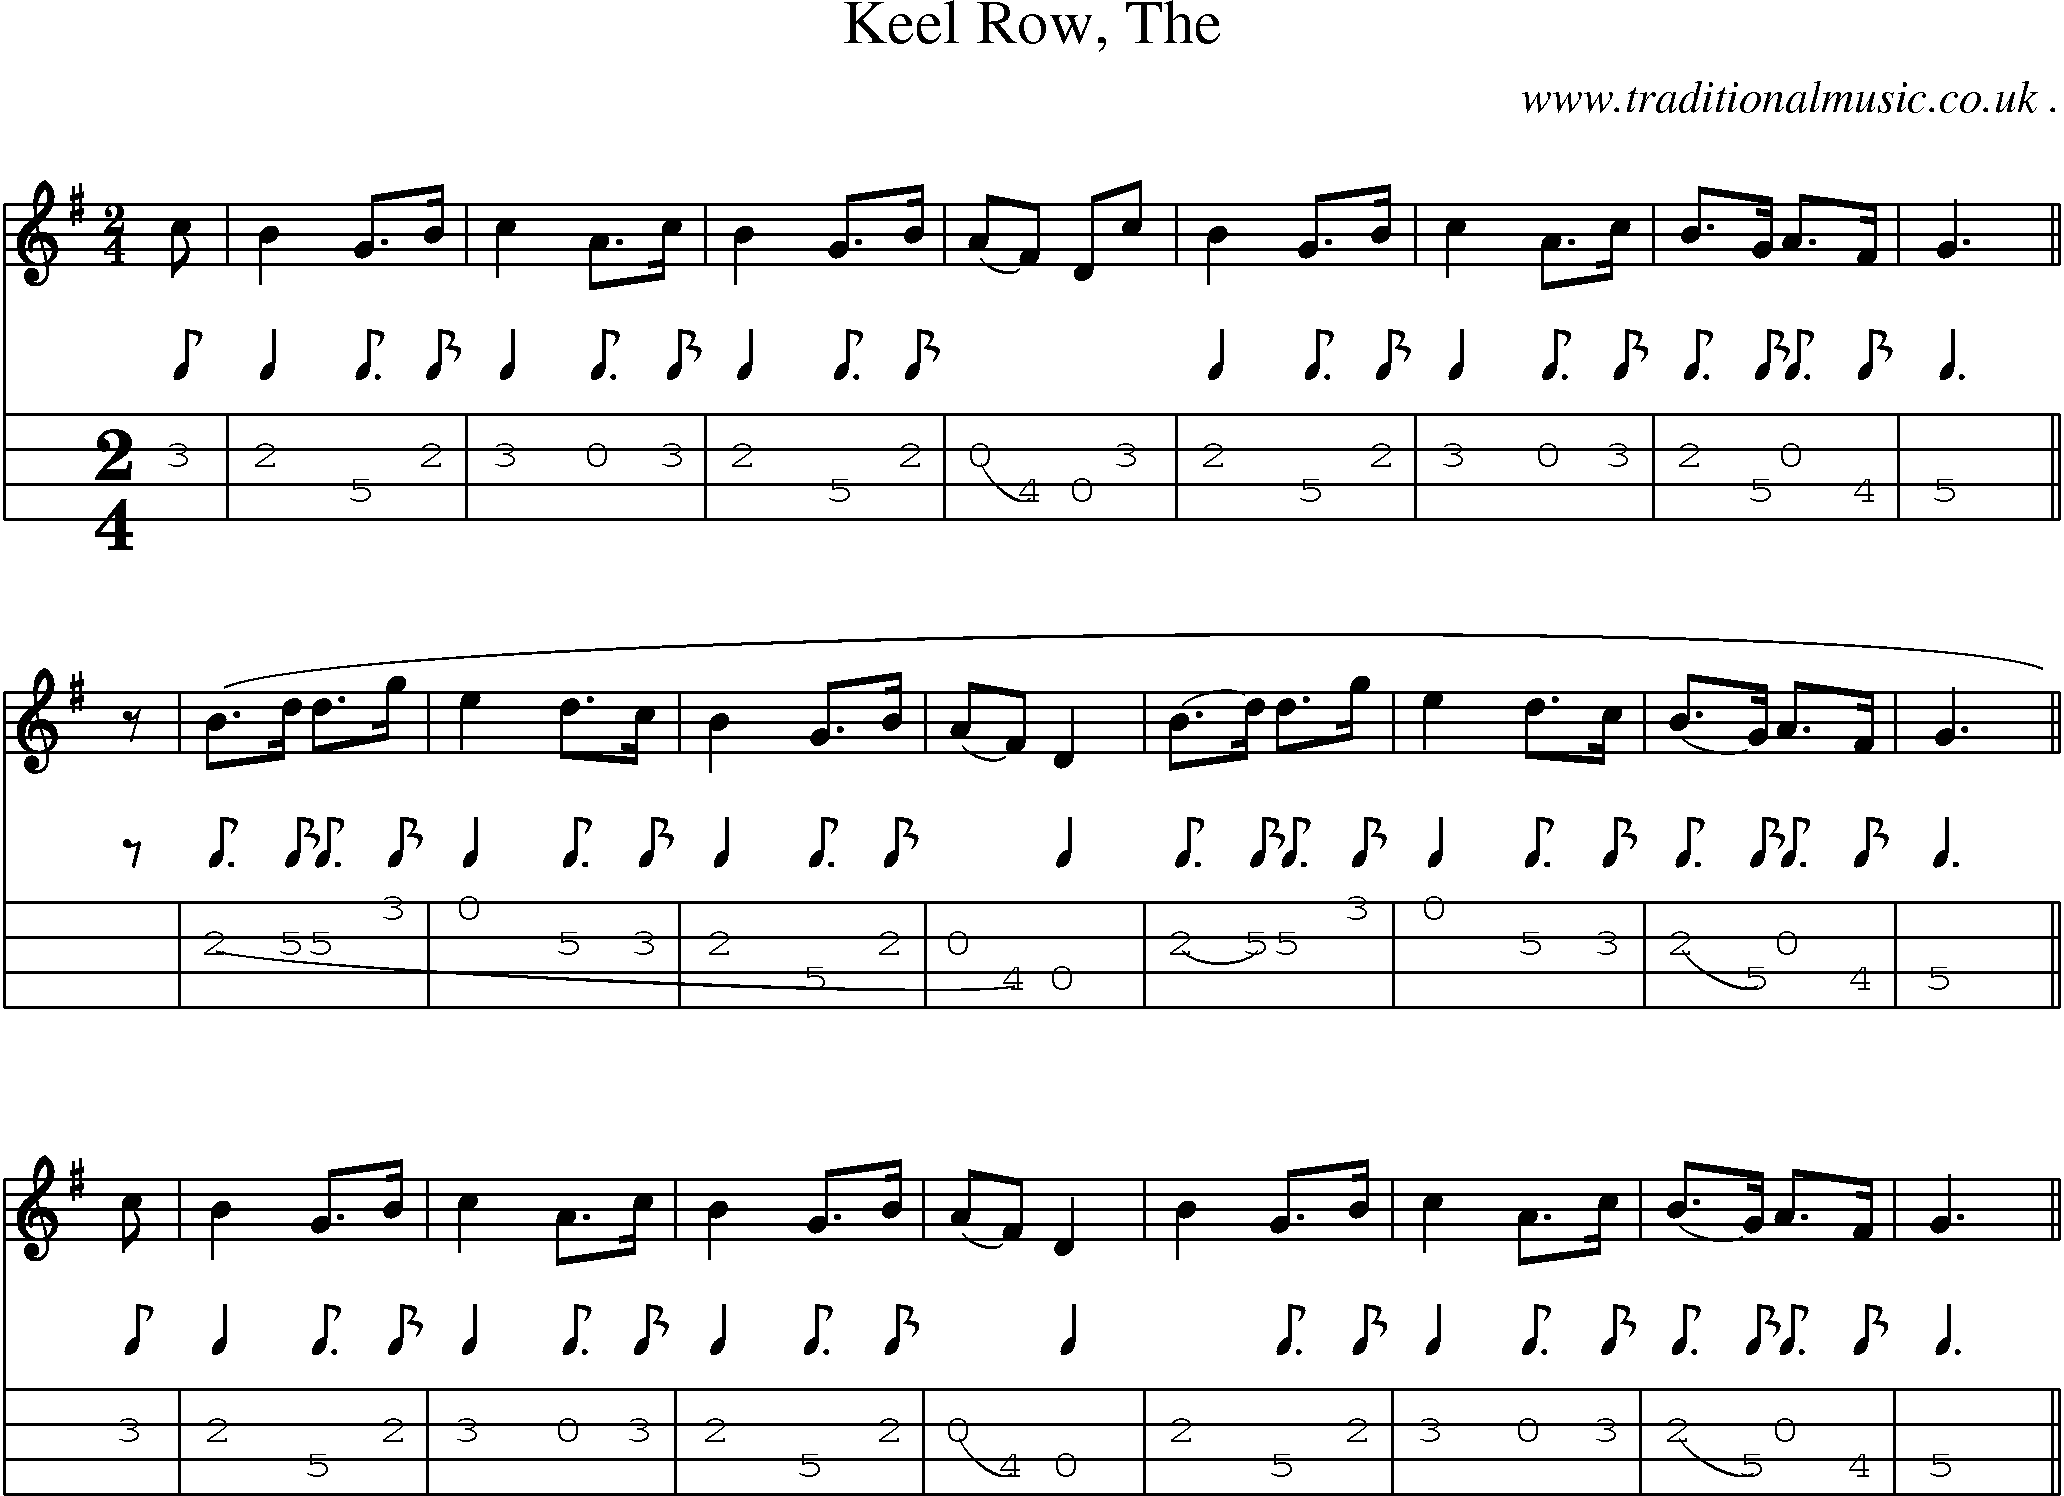 Sheet-music  score, Chords and Mandolin Tabs for Keel Row The